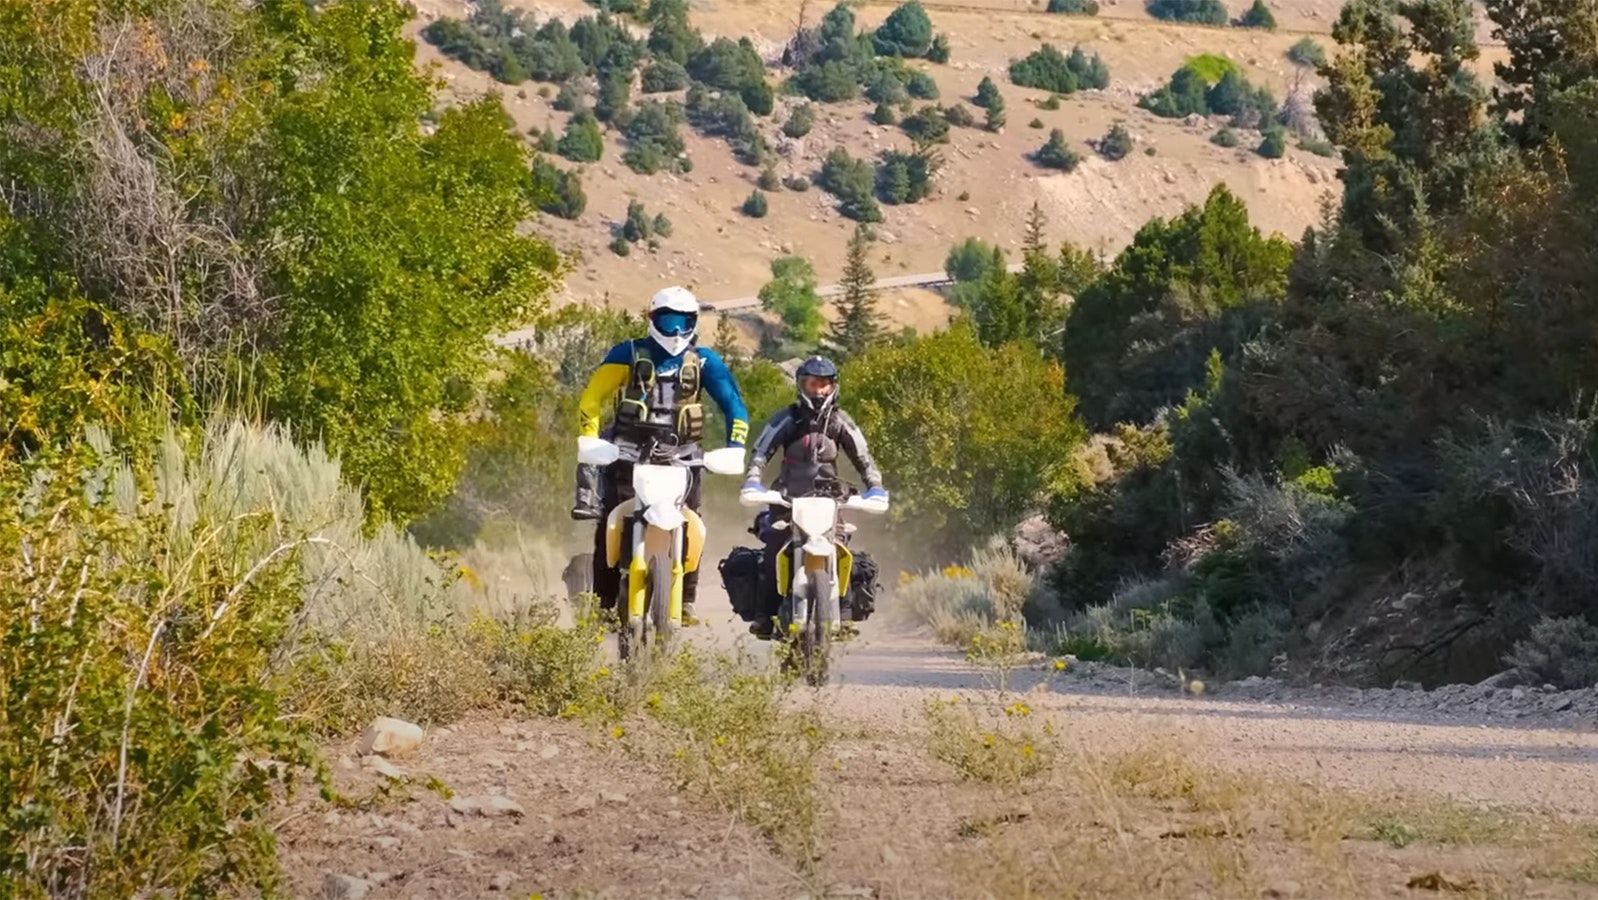 Backcountry motorcyclists are discovering the Wyoming Backcountry Discovery Route.